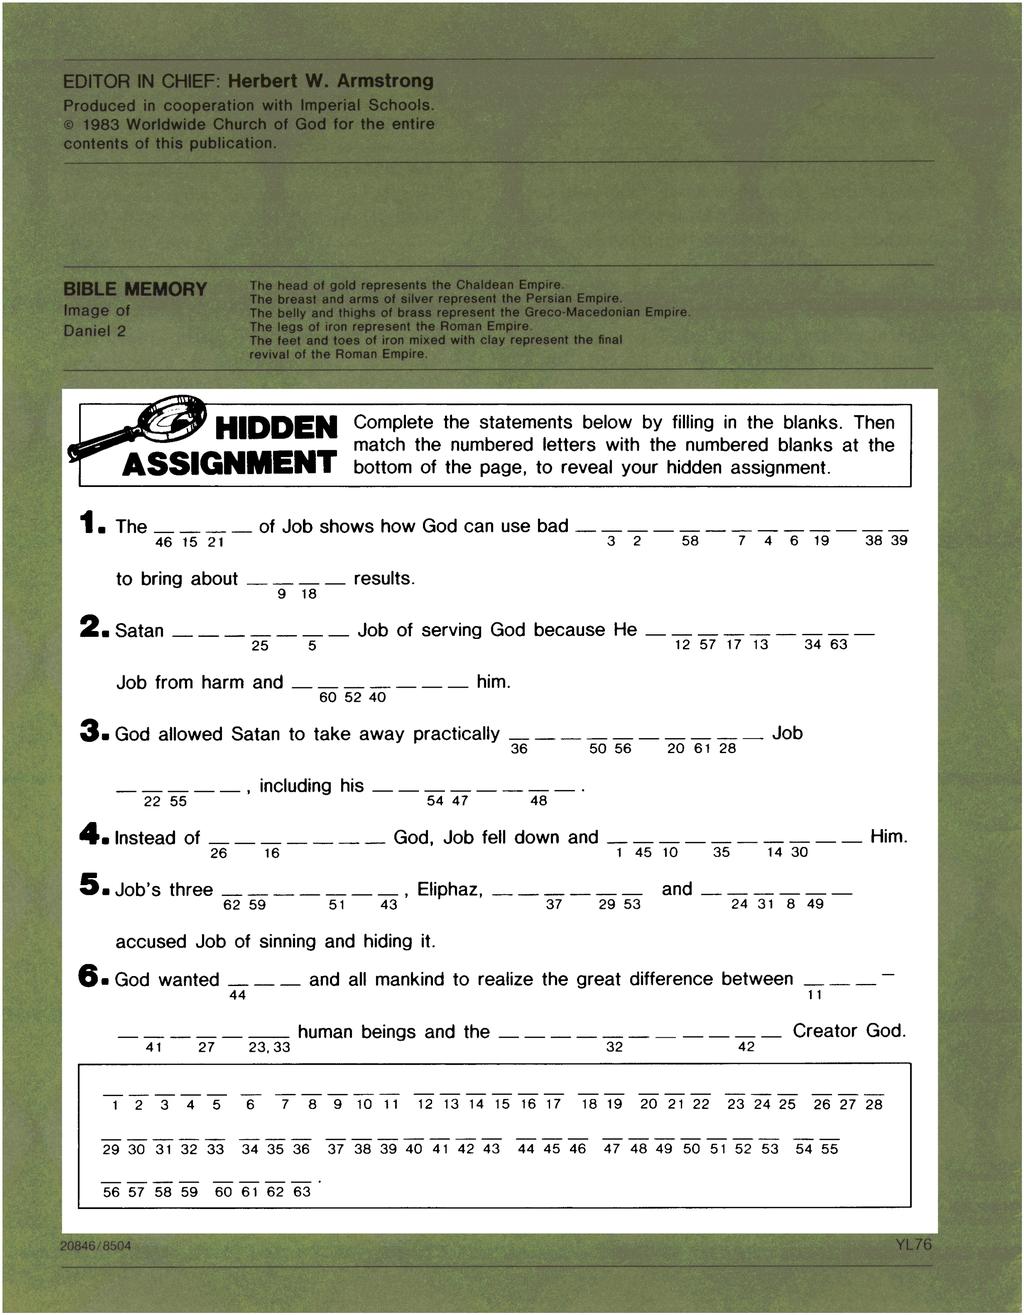 HIDDEN ASSIGNMENT Complete the statements below by filling in the blanks. Then match the numbered letters with the numbered blanks at the bottom of the page, to reveal your hidden assignment.